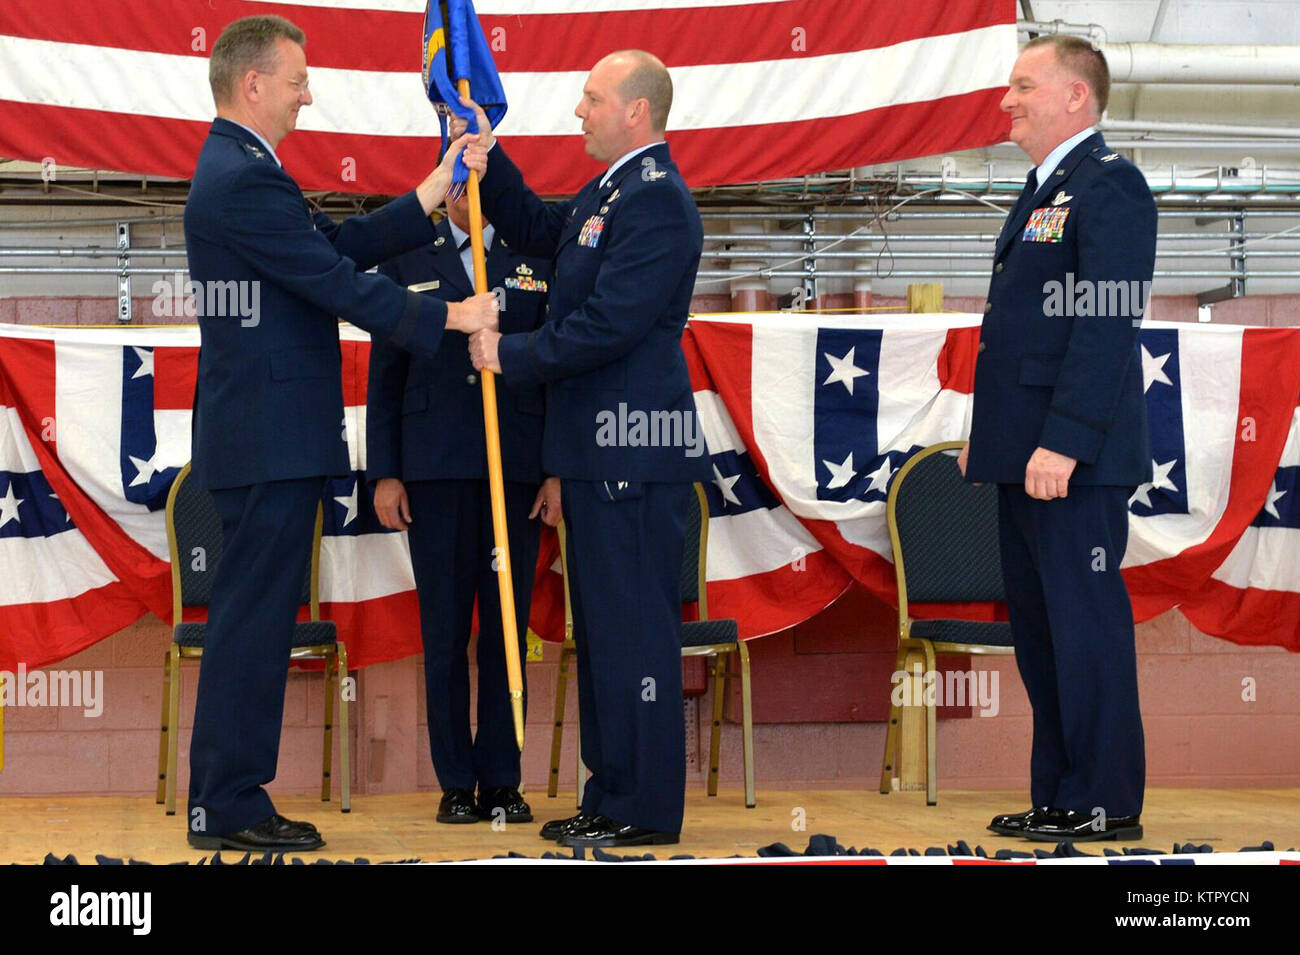 Maj. Gen. Anthony German, New York National Guard Adjutant General, hands the 106th Rescue Wing guidon to Col. Michael Bank, 106th RQW commander, at a change-of-command ceremony at Francis S. Gabreski Airport, April 2. Bank took over command of the 106th from Brig. Gen. Thomas Owens, who has moved on to Assistant Adjutant General for Air at the Joint Force Headquarters in Latham, N.Y. Stock Photo